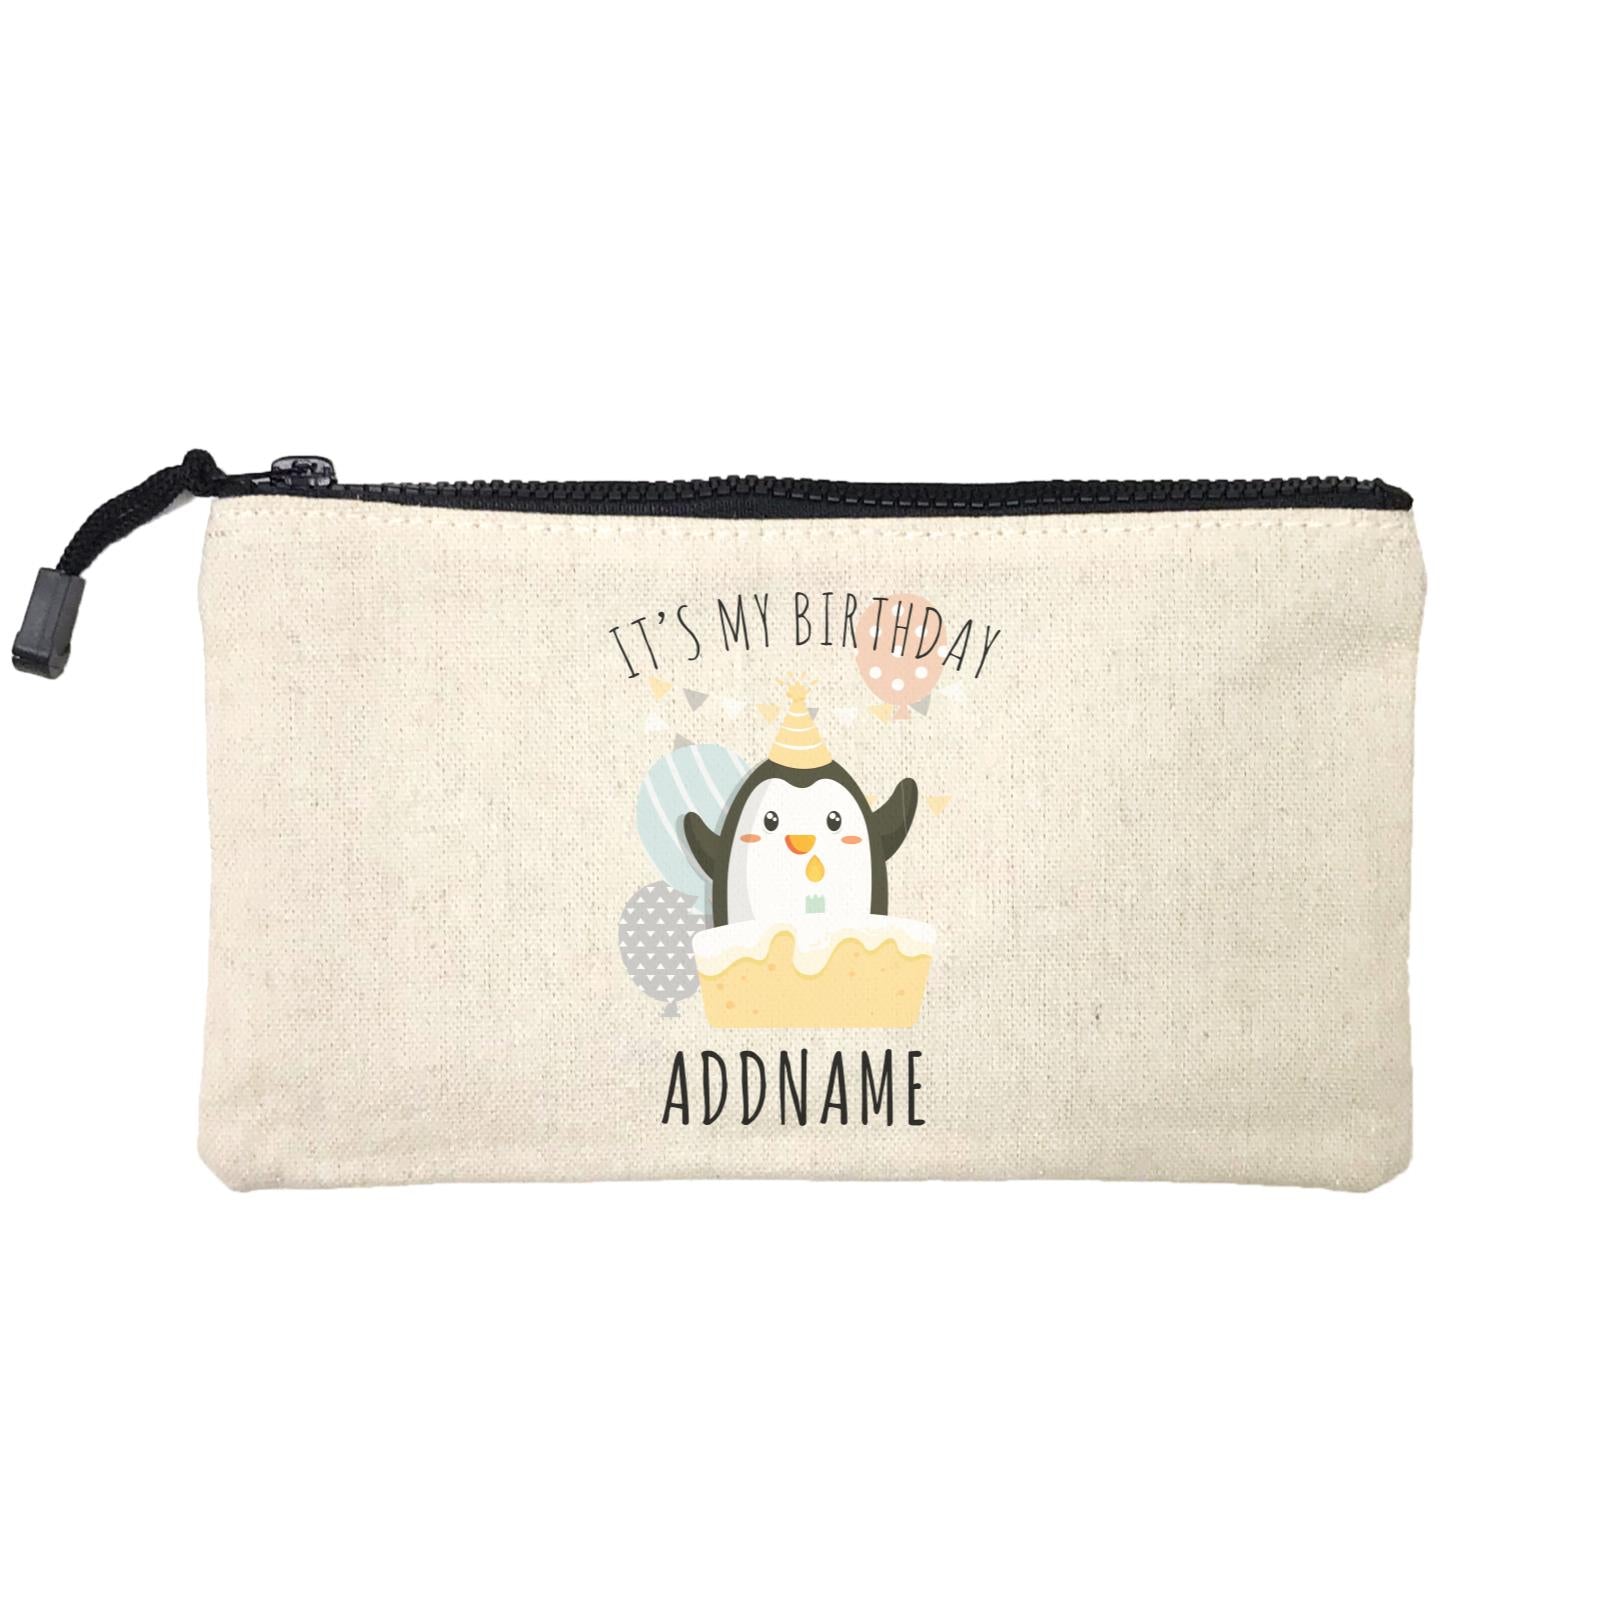 Birthday Cute Penguin And Cake It's My Birthday Addname Mini Accessories Stationery Pouch